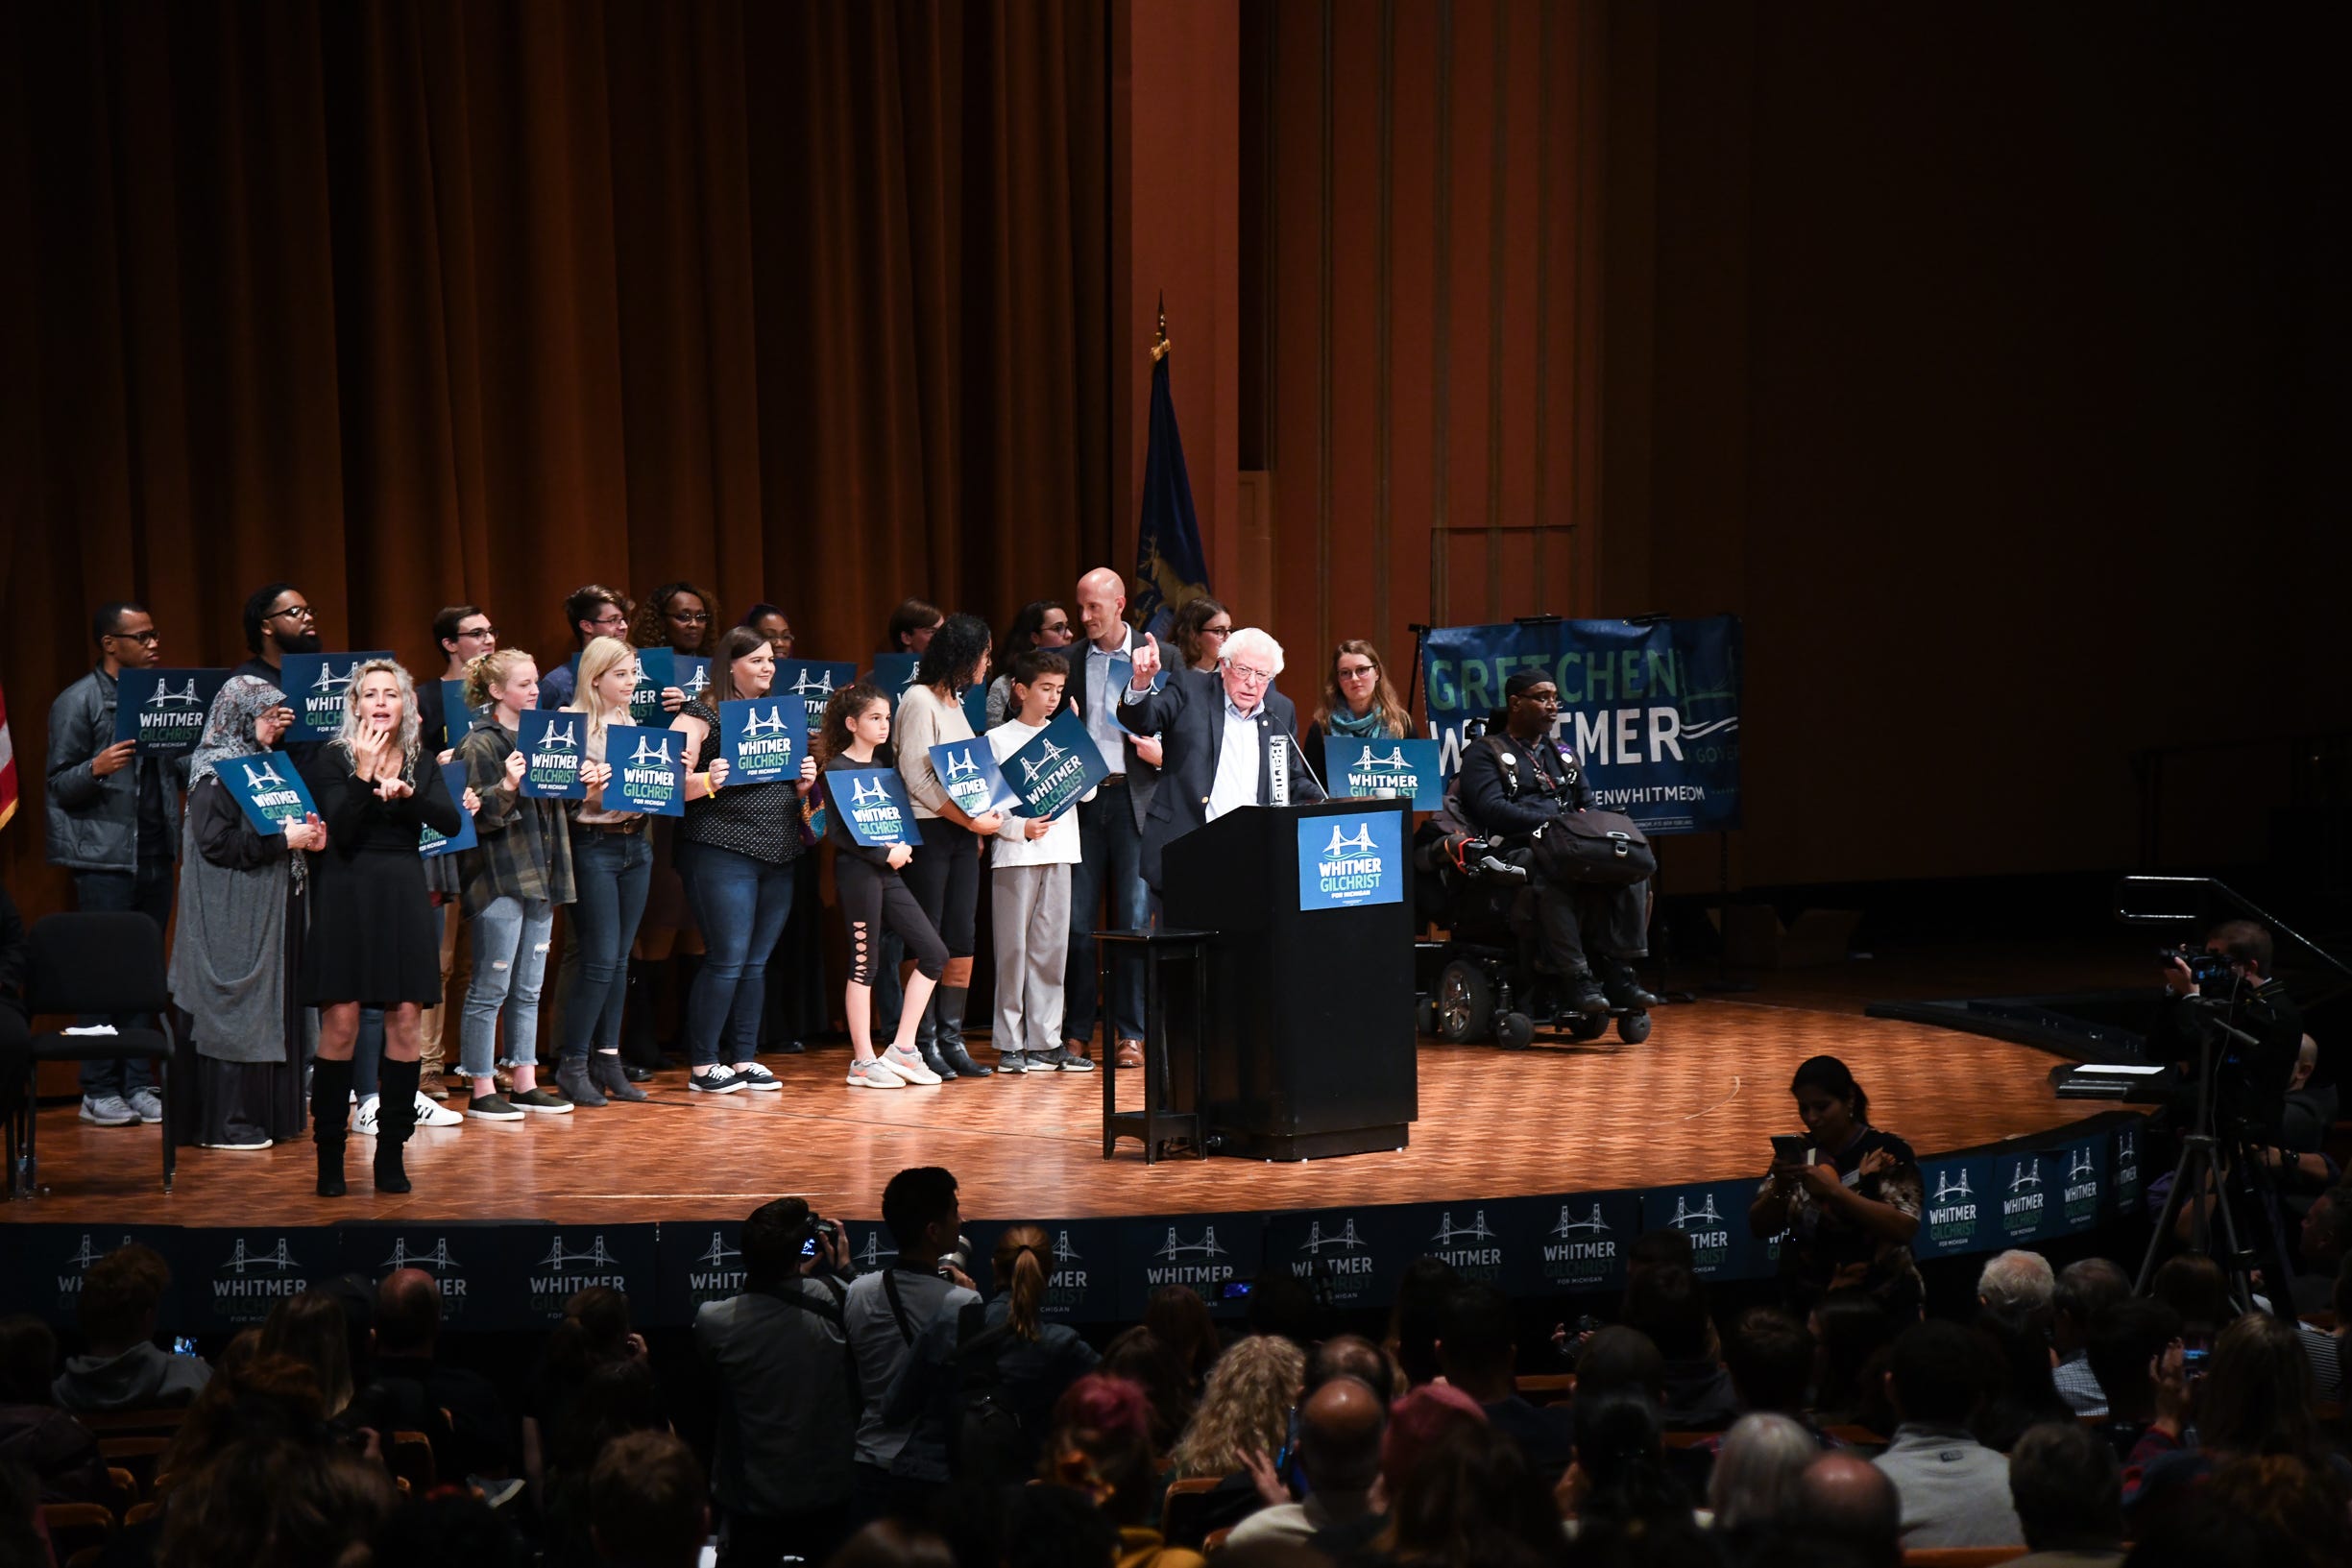 U.S. Sen. Bernie Sanders of Vermont stumps for gubernatorial candidate Gretchen Whitmer during a campaign rally for Michigan Democratic candidates at Rackham Auditorium at the University of Michigan in Ann Arbor.